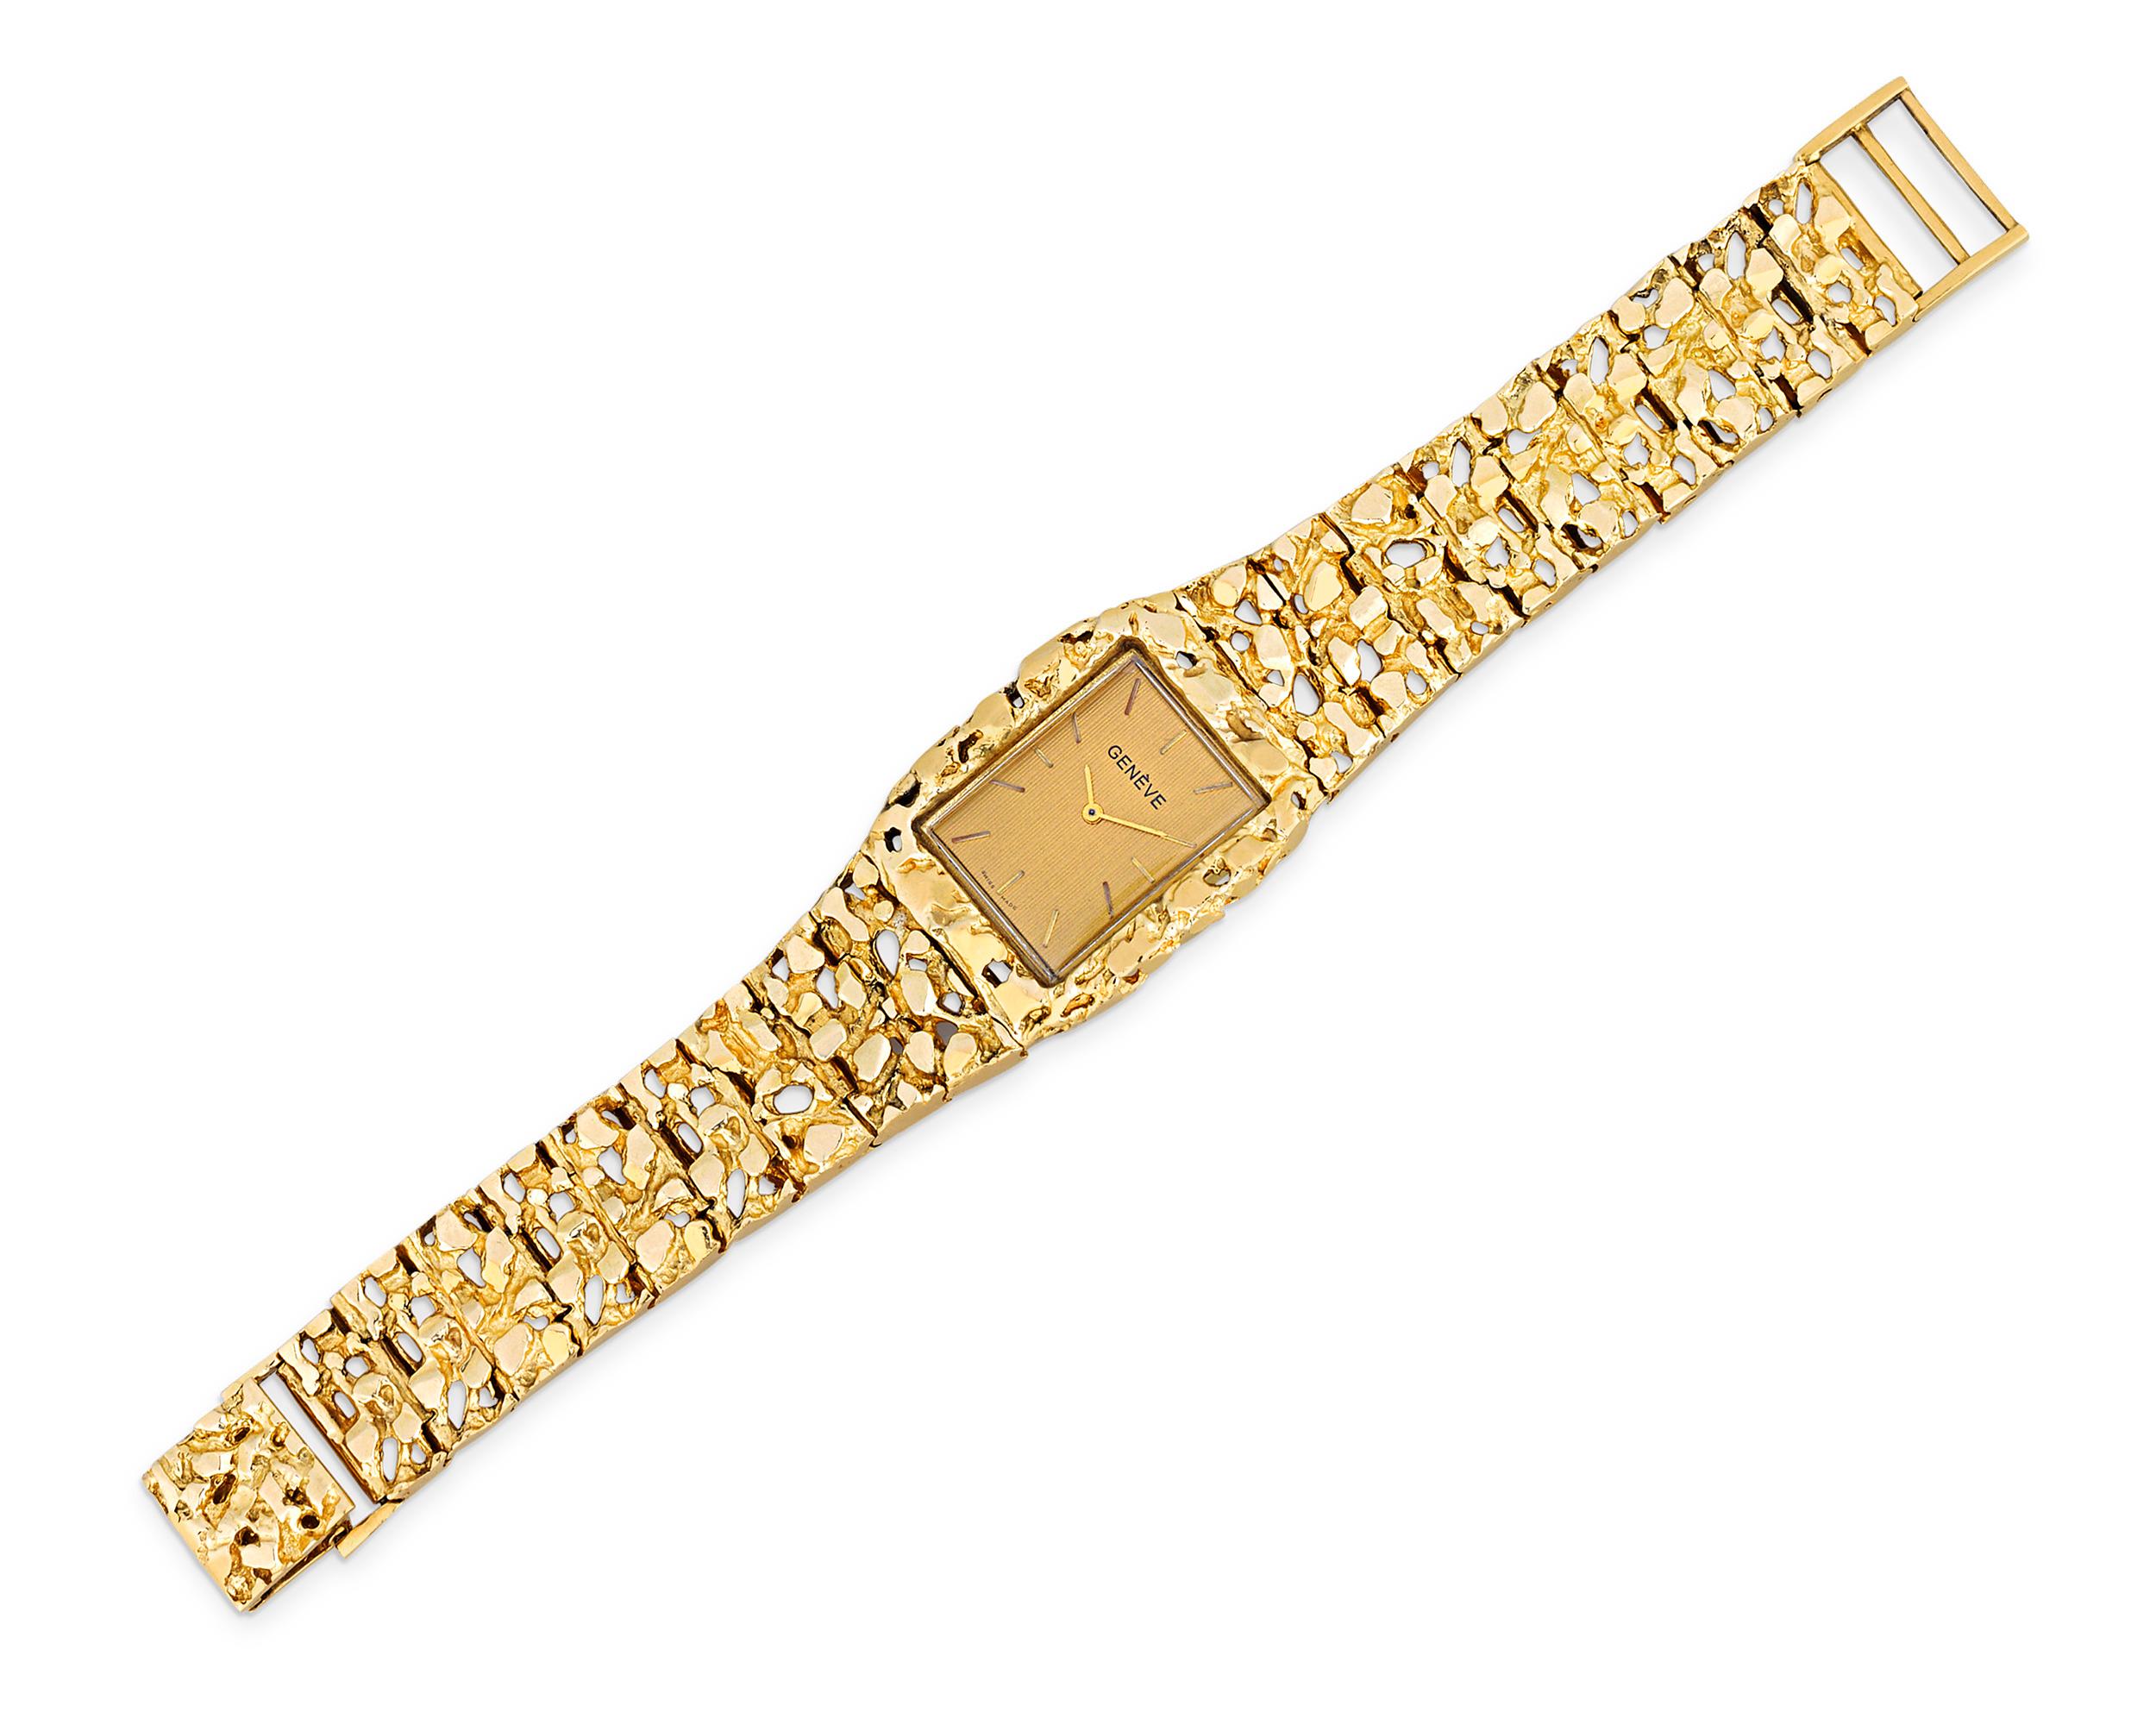 This watch was once owned and worn by one of the most celebrated cultural icons of the 20th century, Elvis Presley. The striking Geneve timepiece is crafted from hammered 14K yellow gold, creating a uniquely textured surface. The watch was later